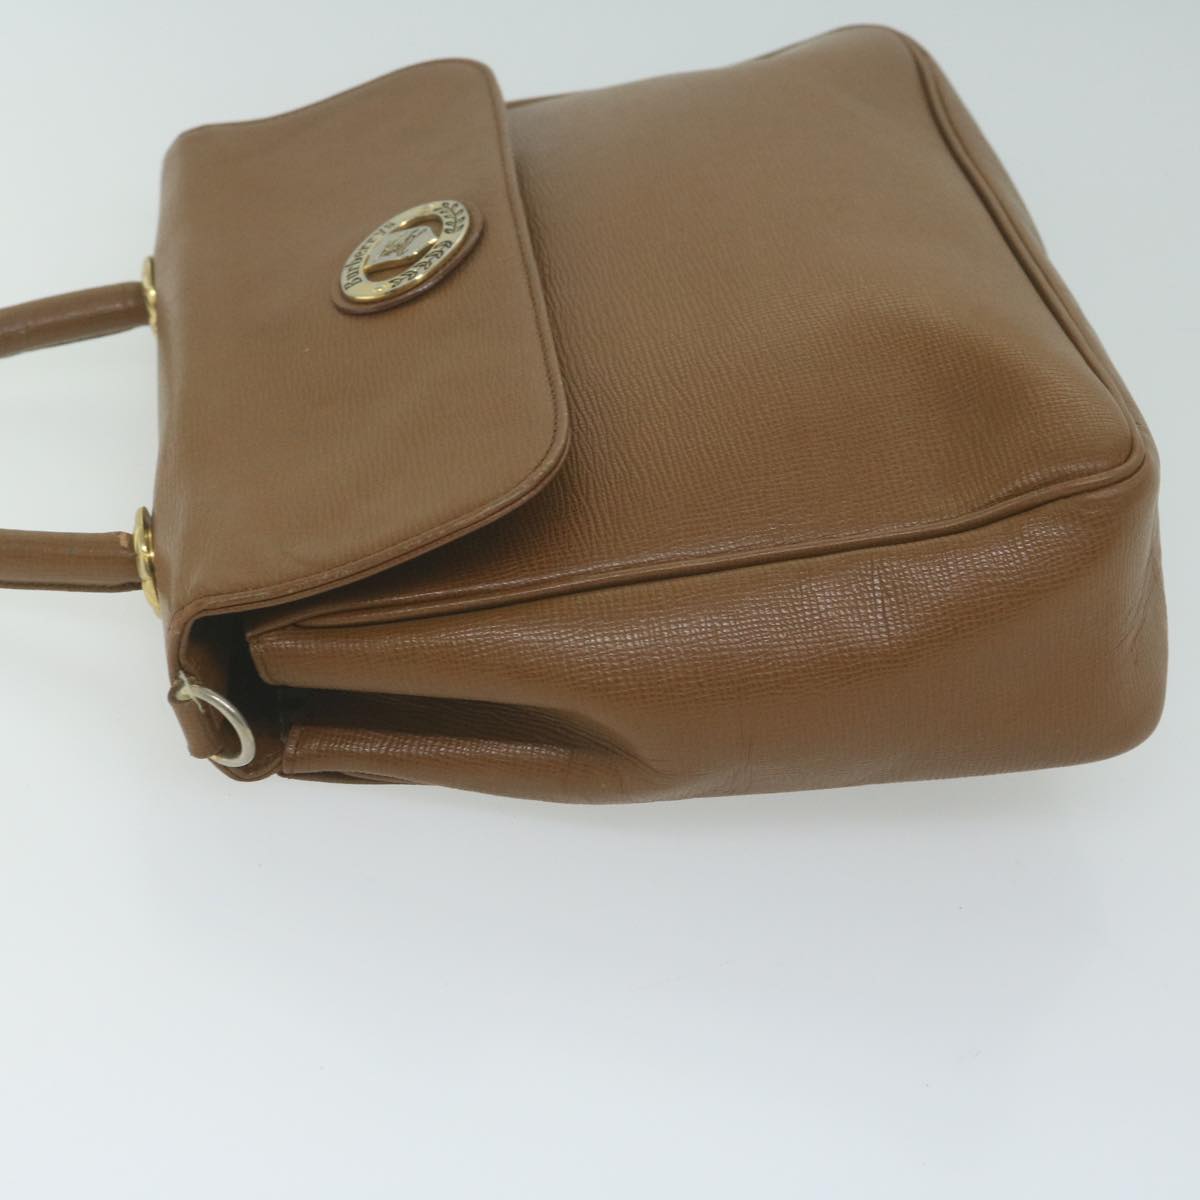 Burberrys Hand Bag Leather 2way Brown Auth bs11814